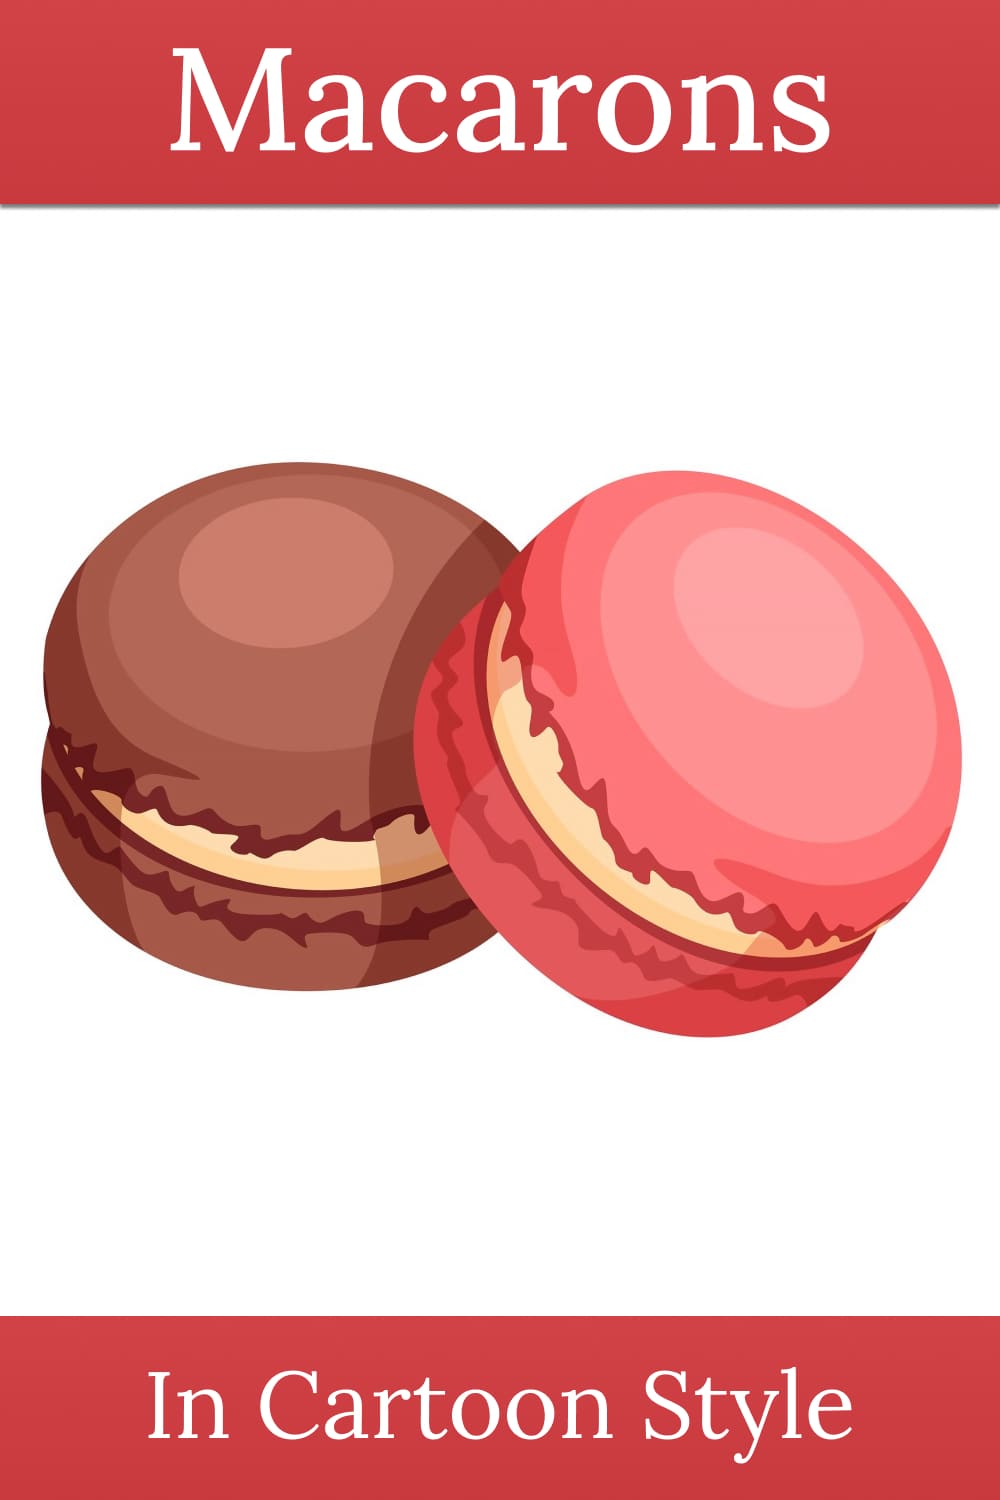 Macarons In Cartoon Style. Pink And Chocolate French Almond - Pinterest.